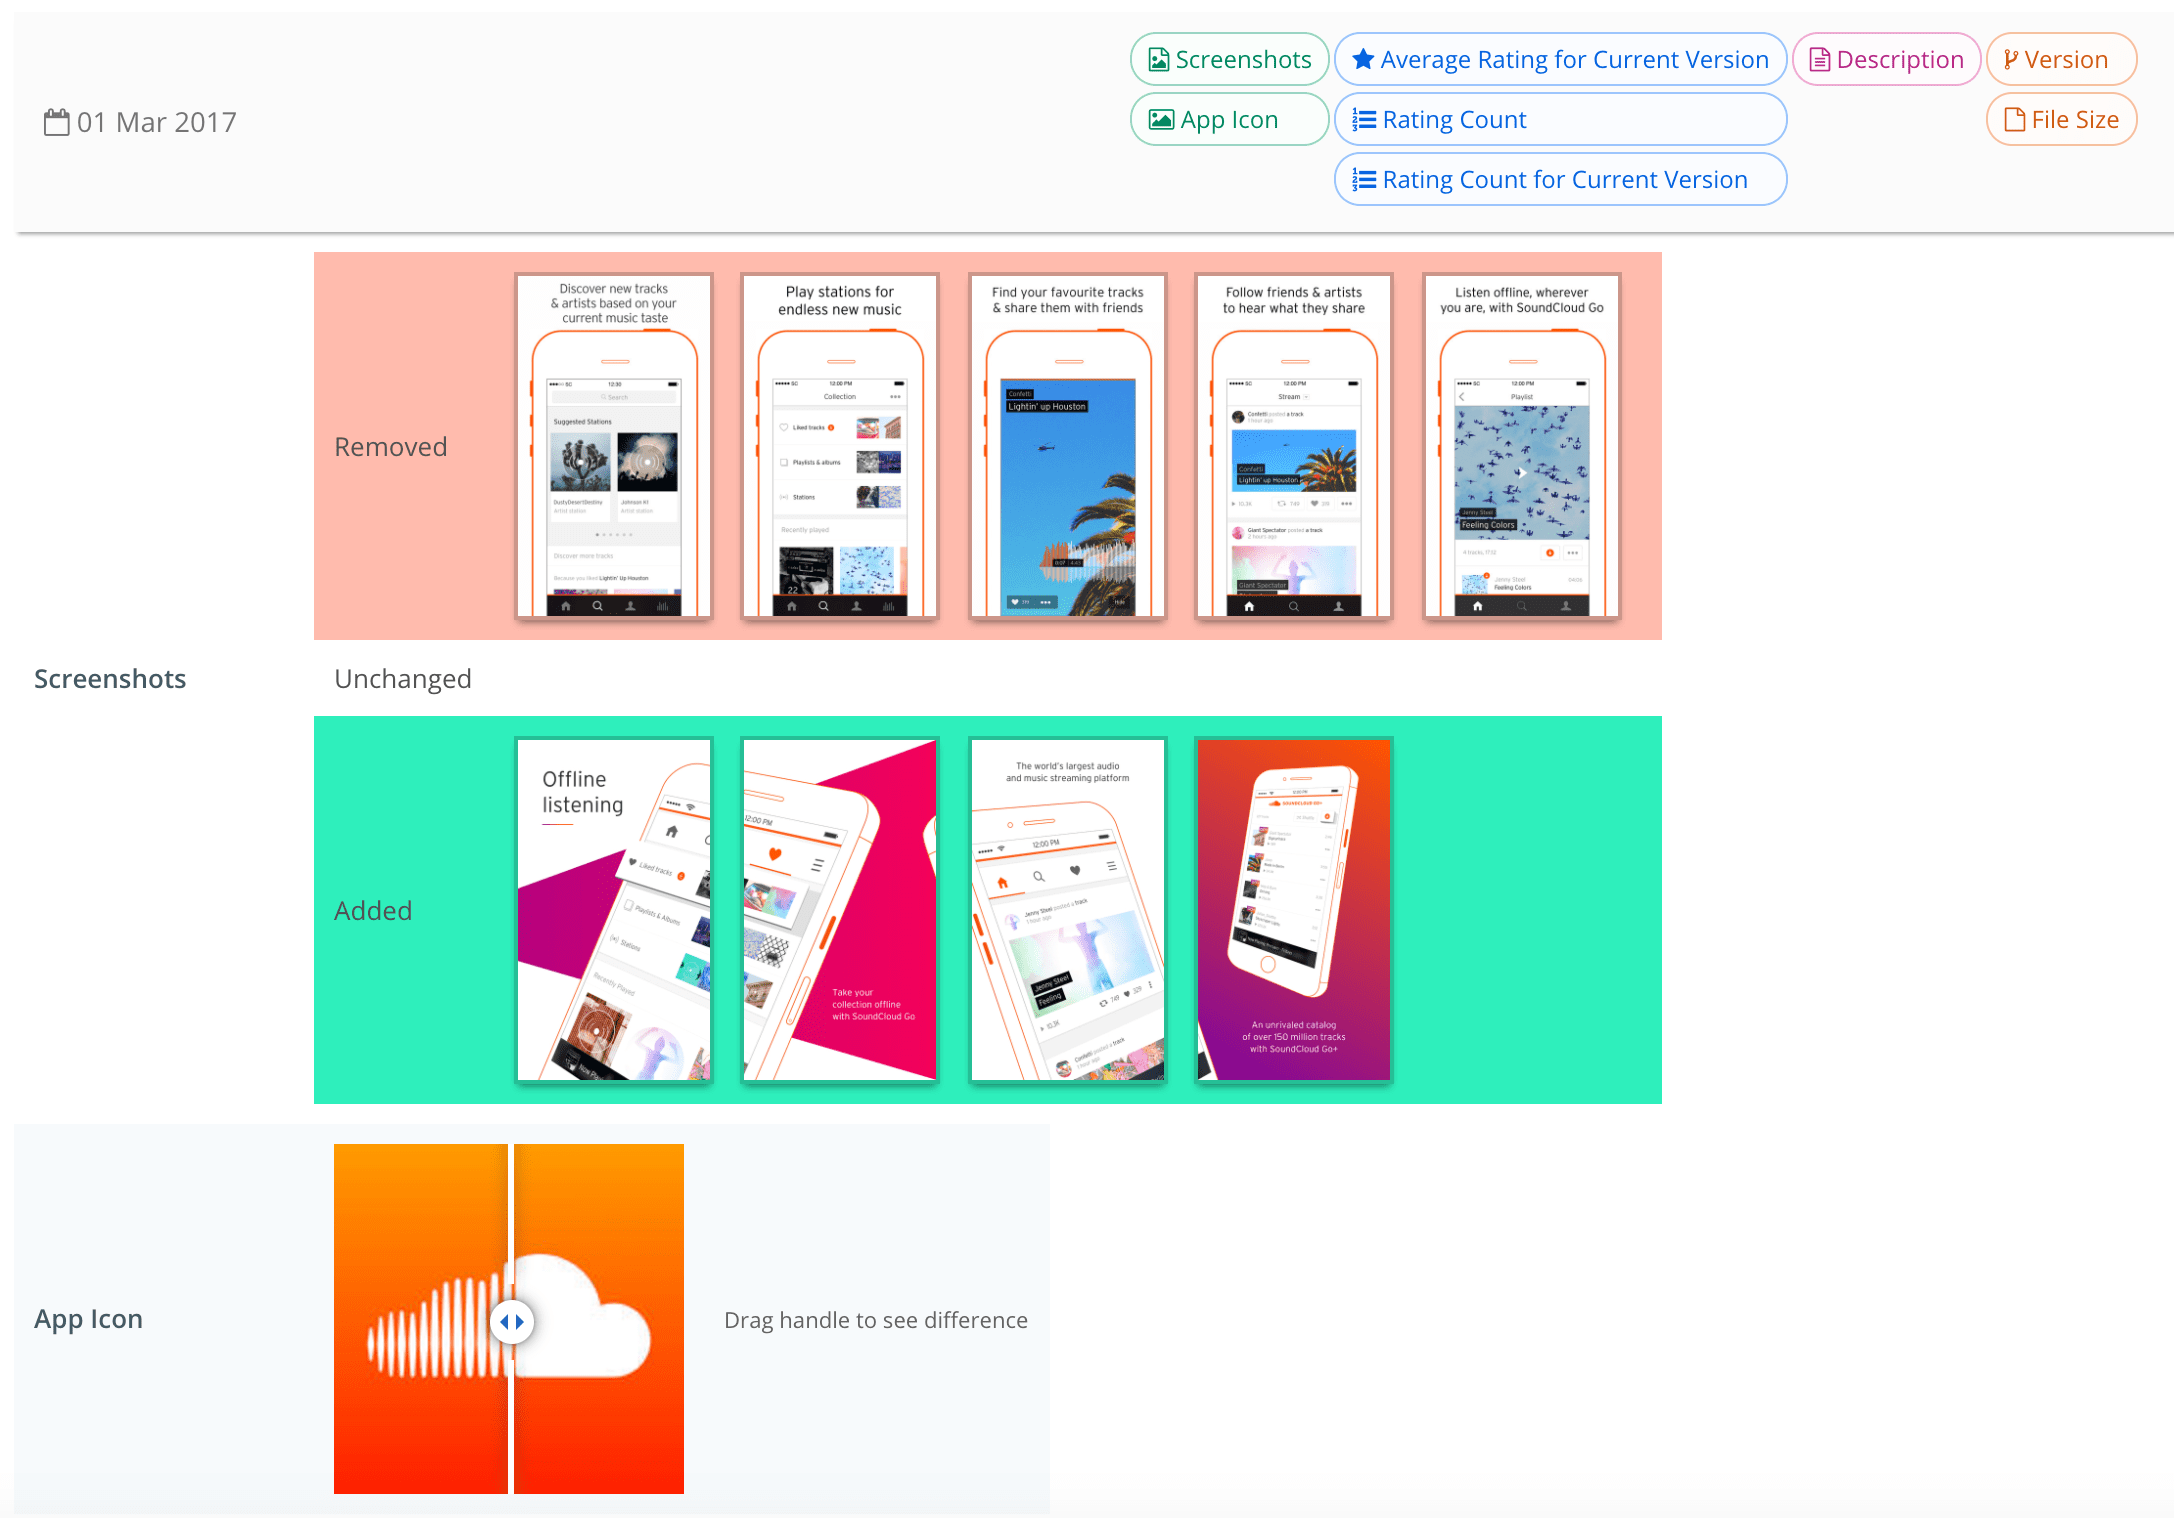 soundcloud changed their screenshots to a set of 4-min